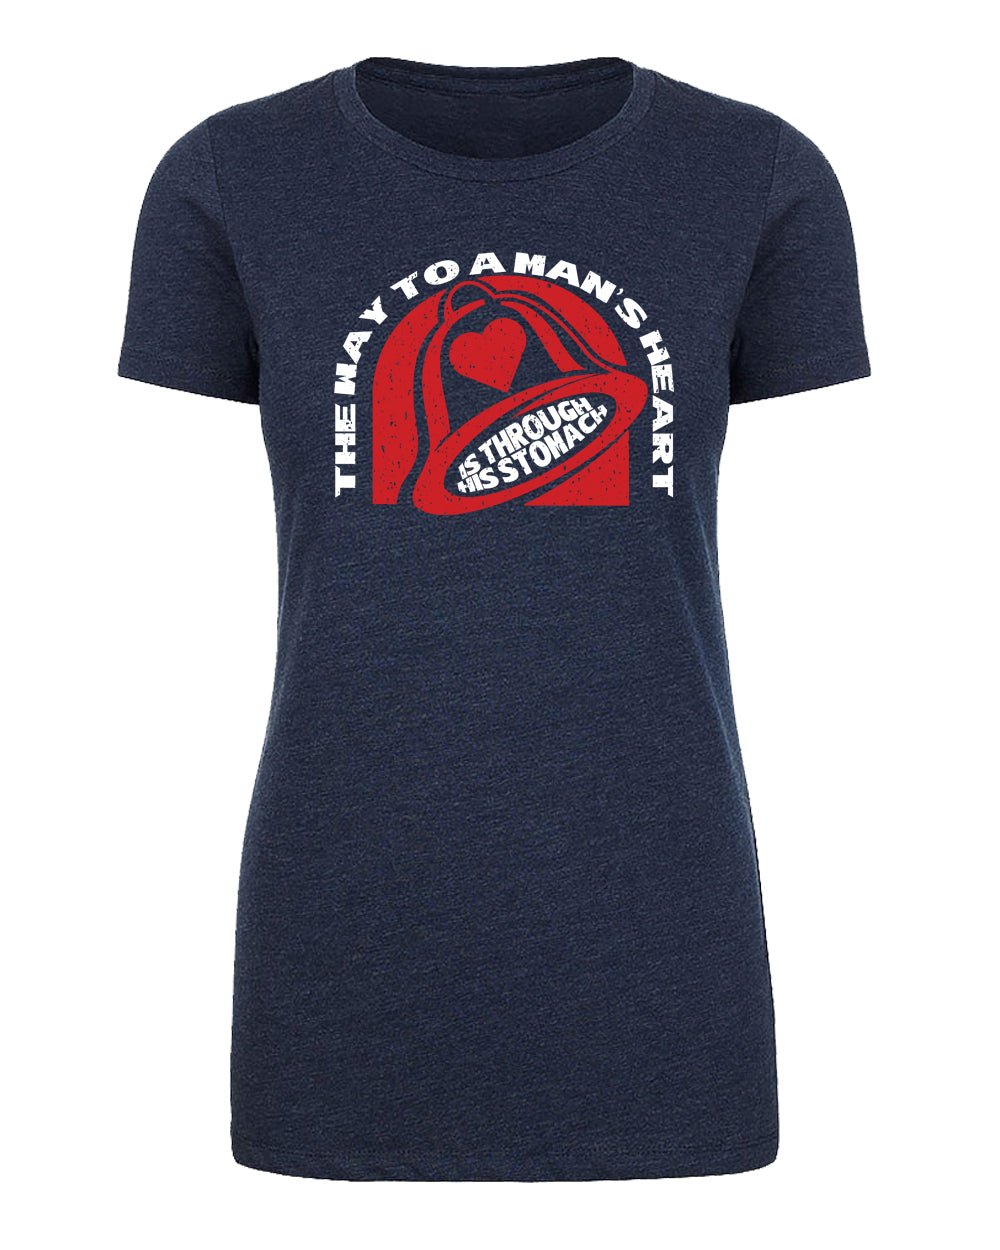 The Way to a Man's Heart Is Through His Stomach (Tacos) Womens T Shirts - Mato & Hash